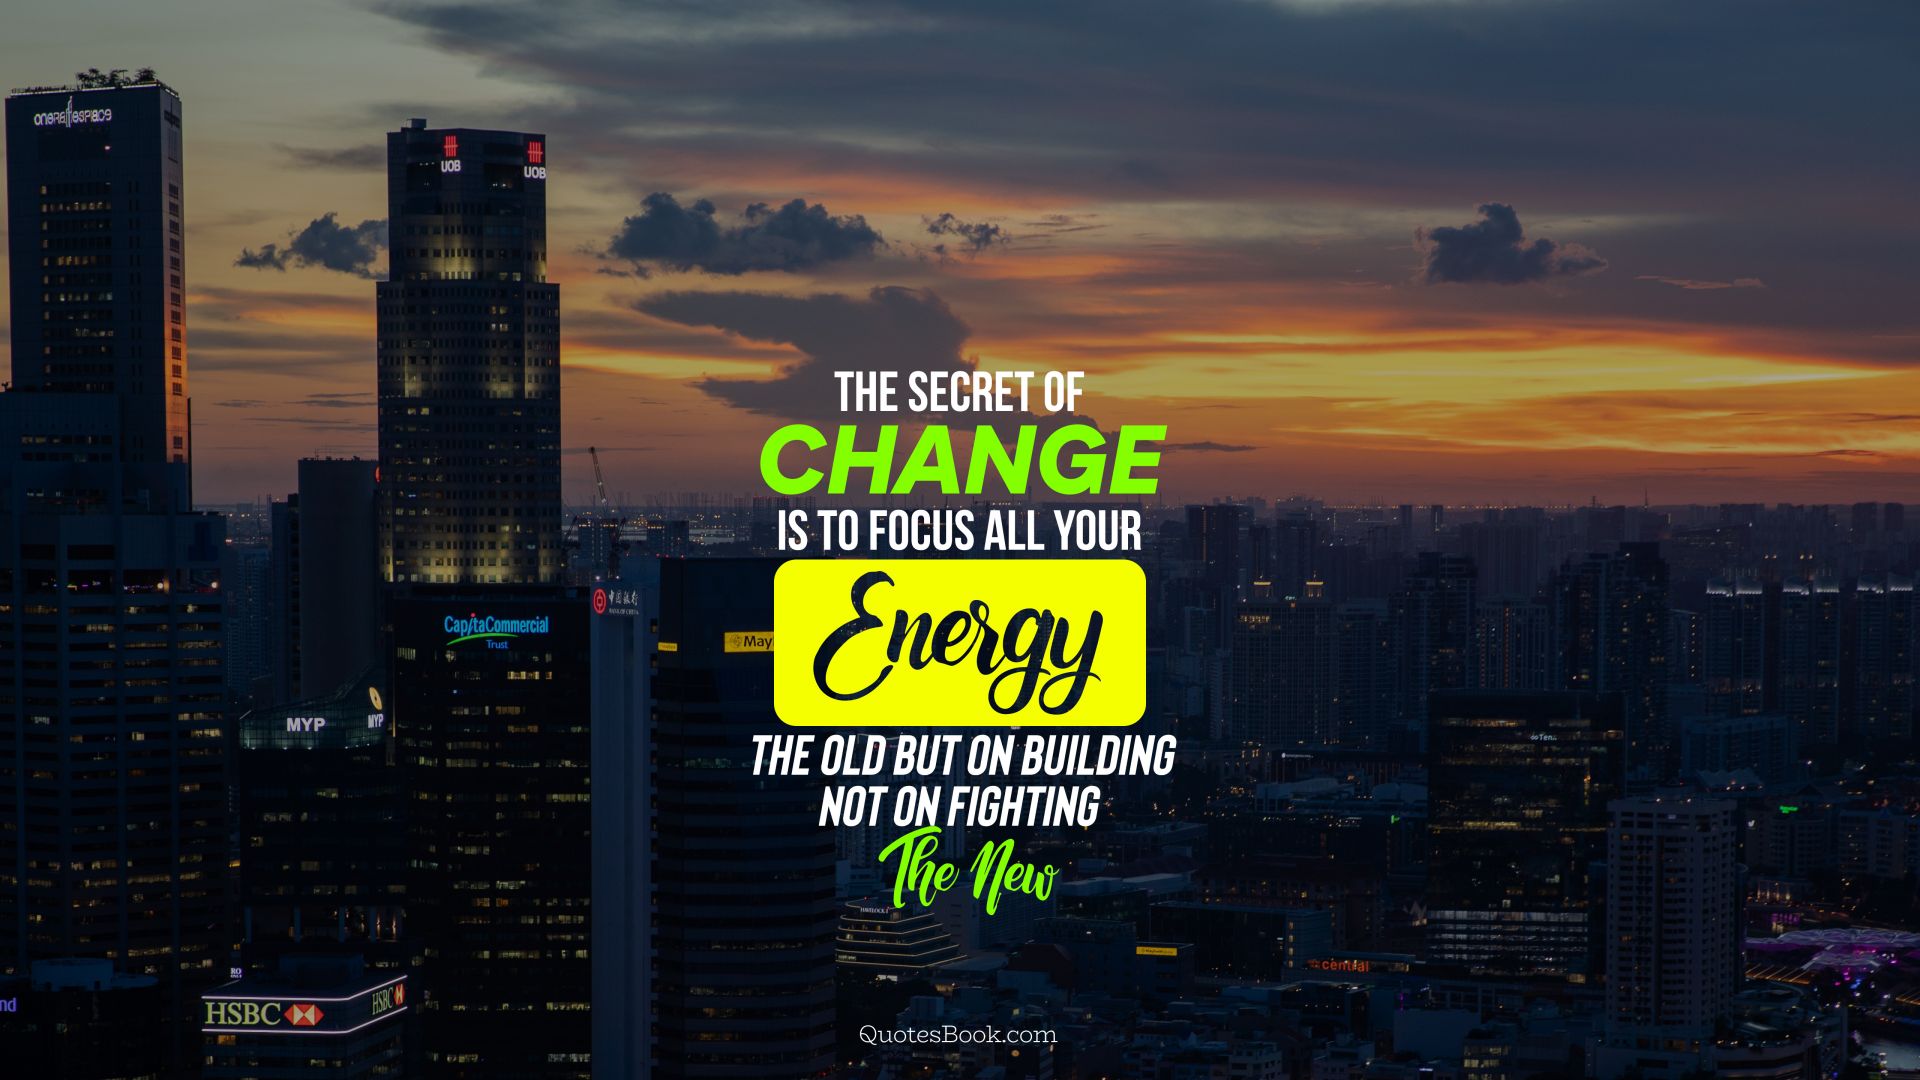 The secret of change is to focus all your energy not on fighting the old but on building the new